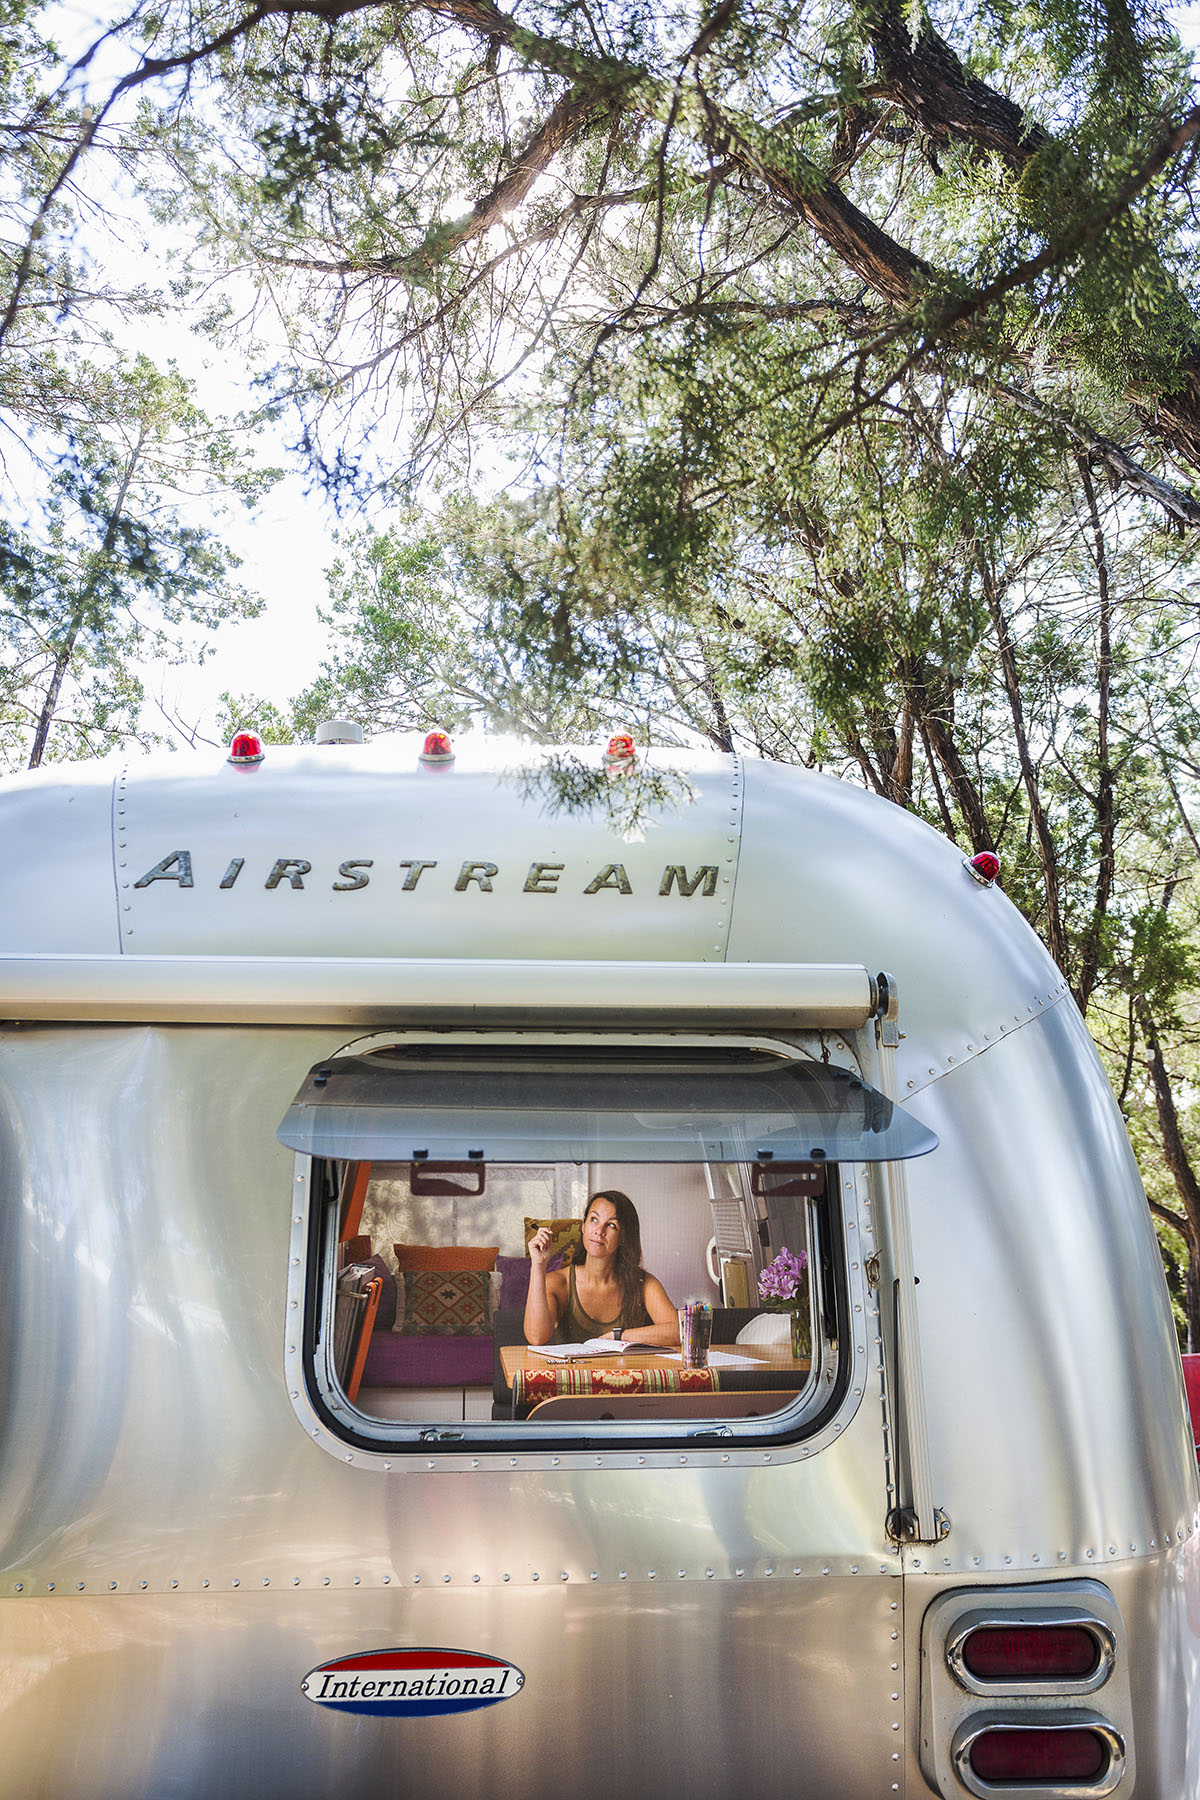 A woman looks through the window of a silver Airstream trailer